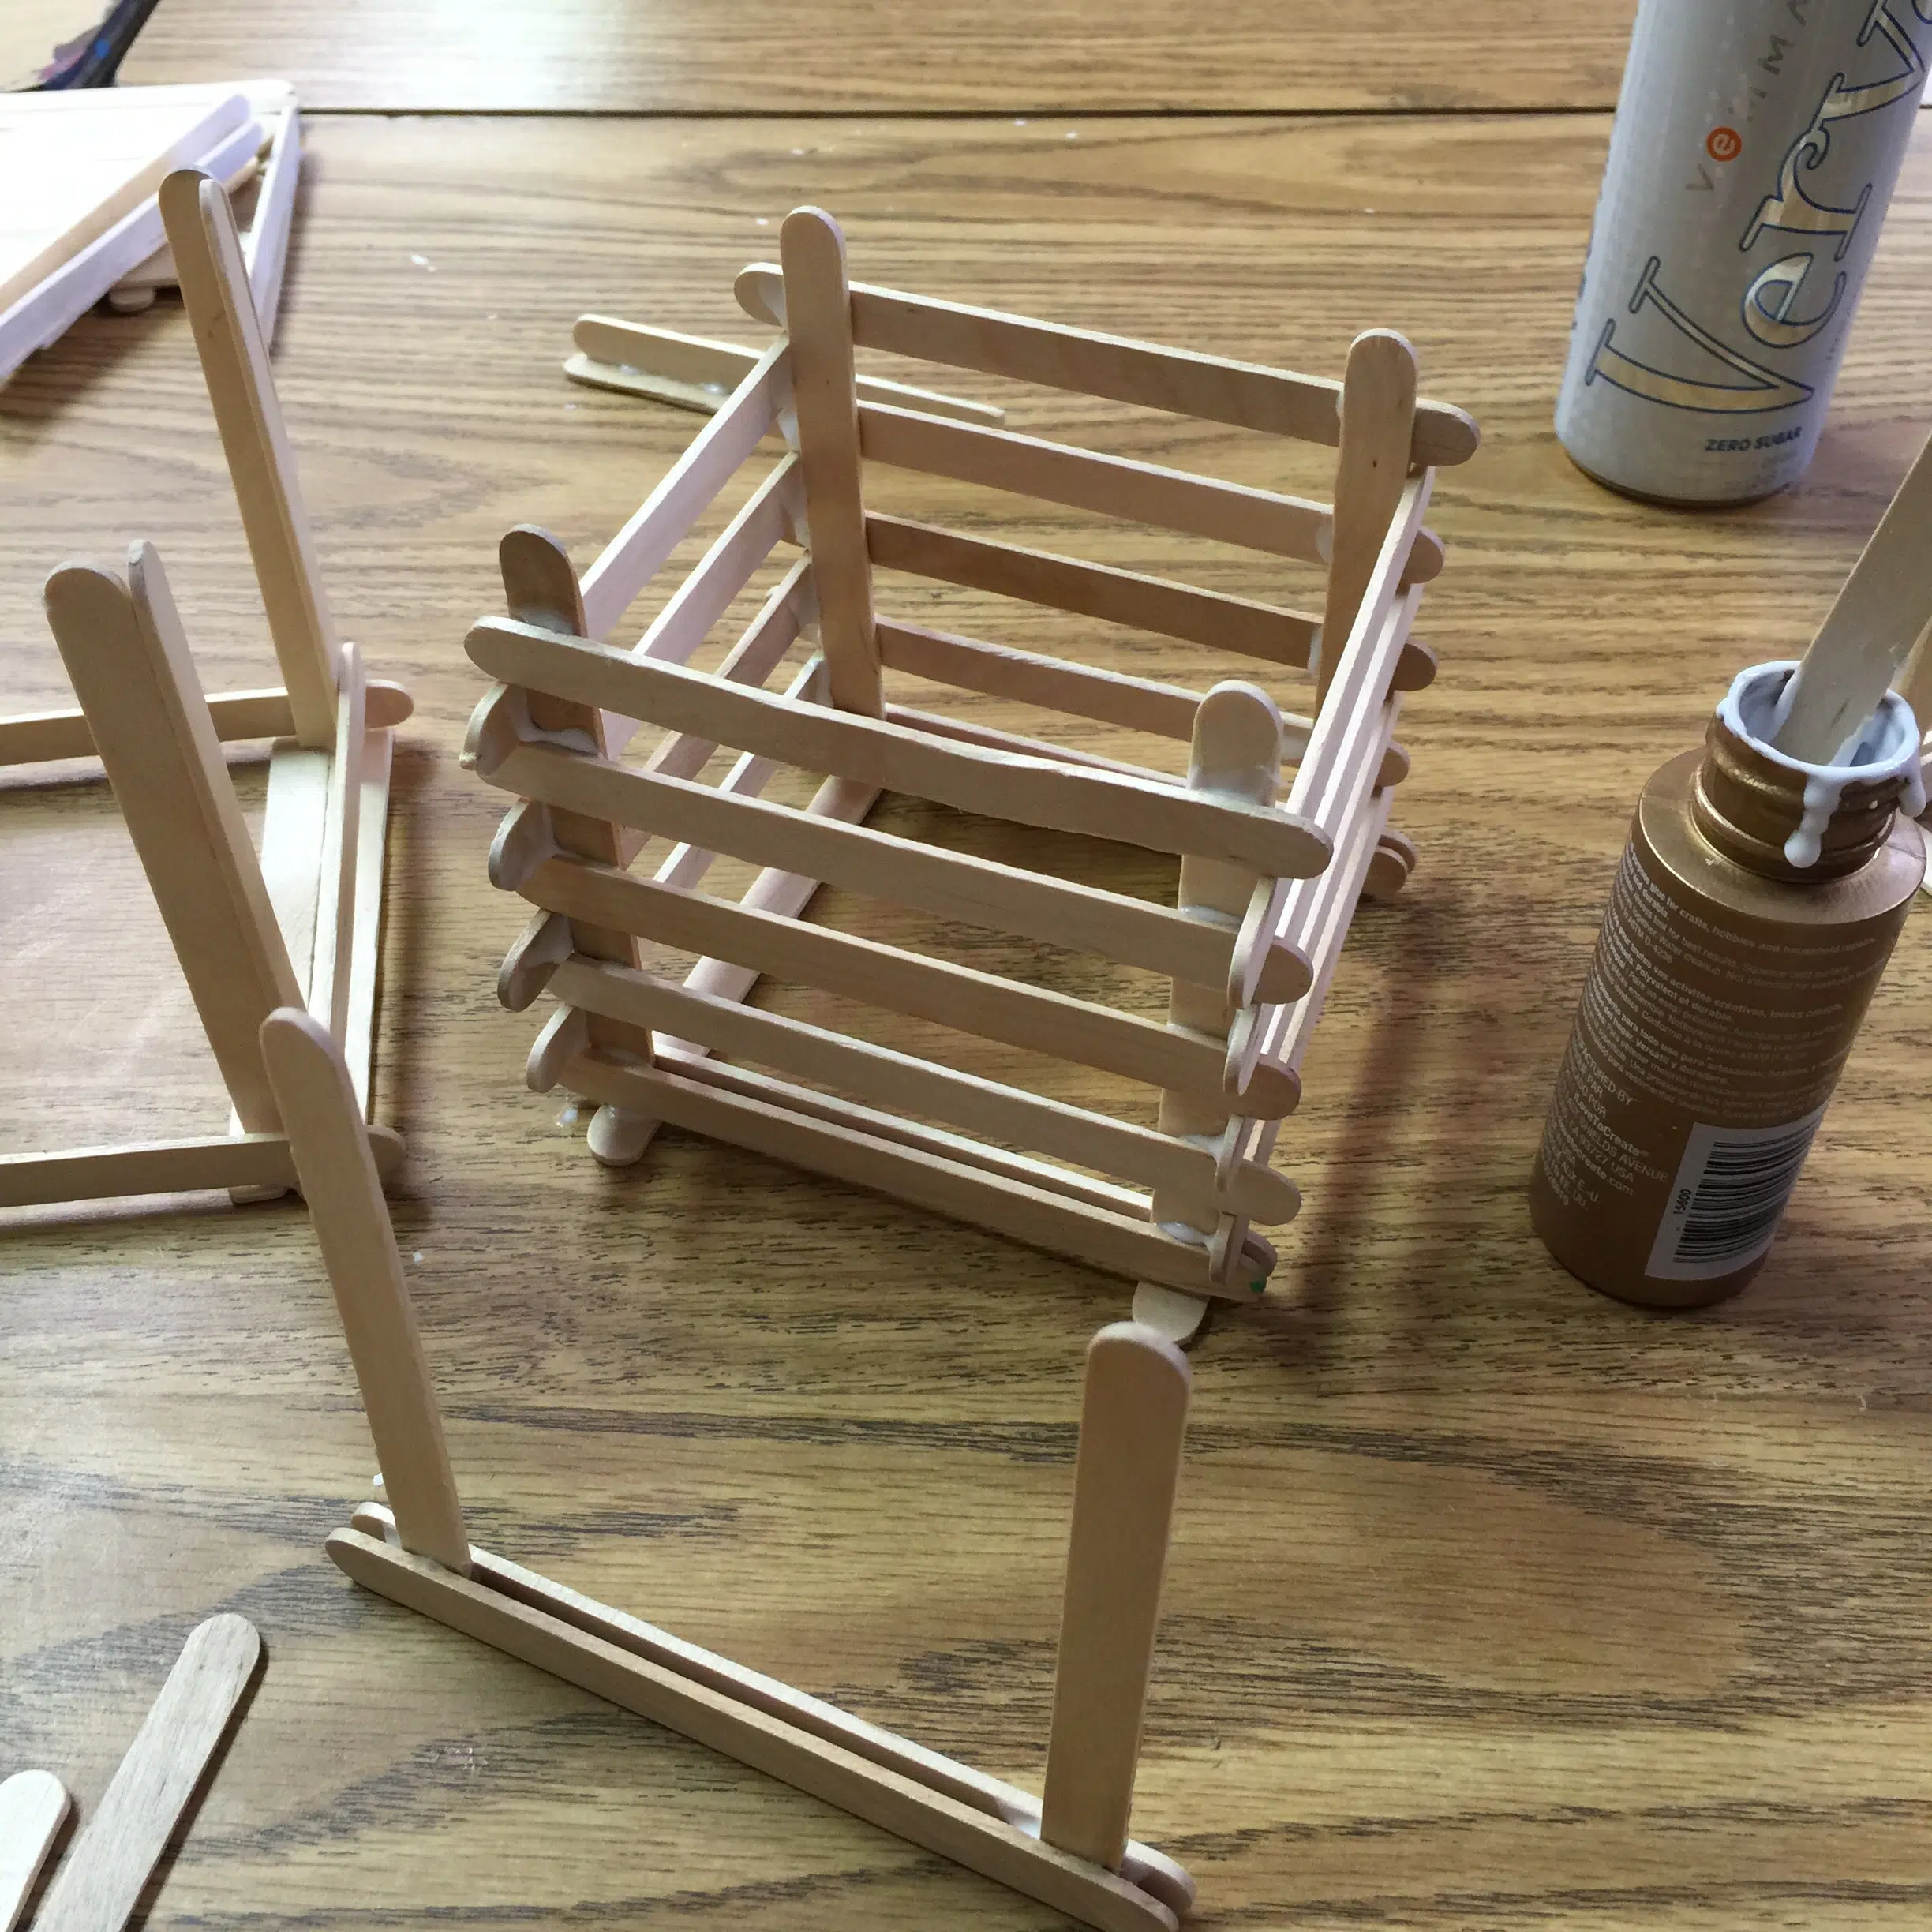 cool popsicle stick projects